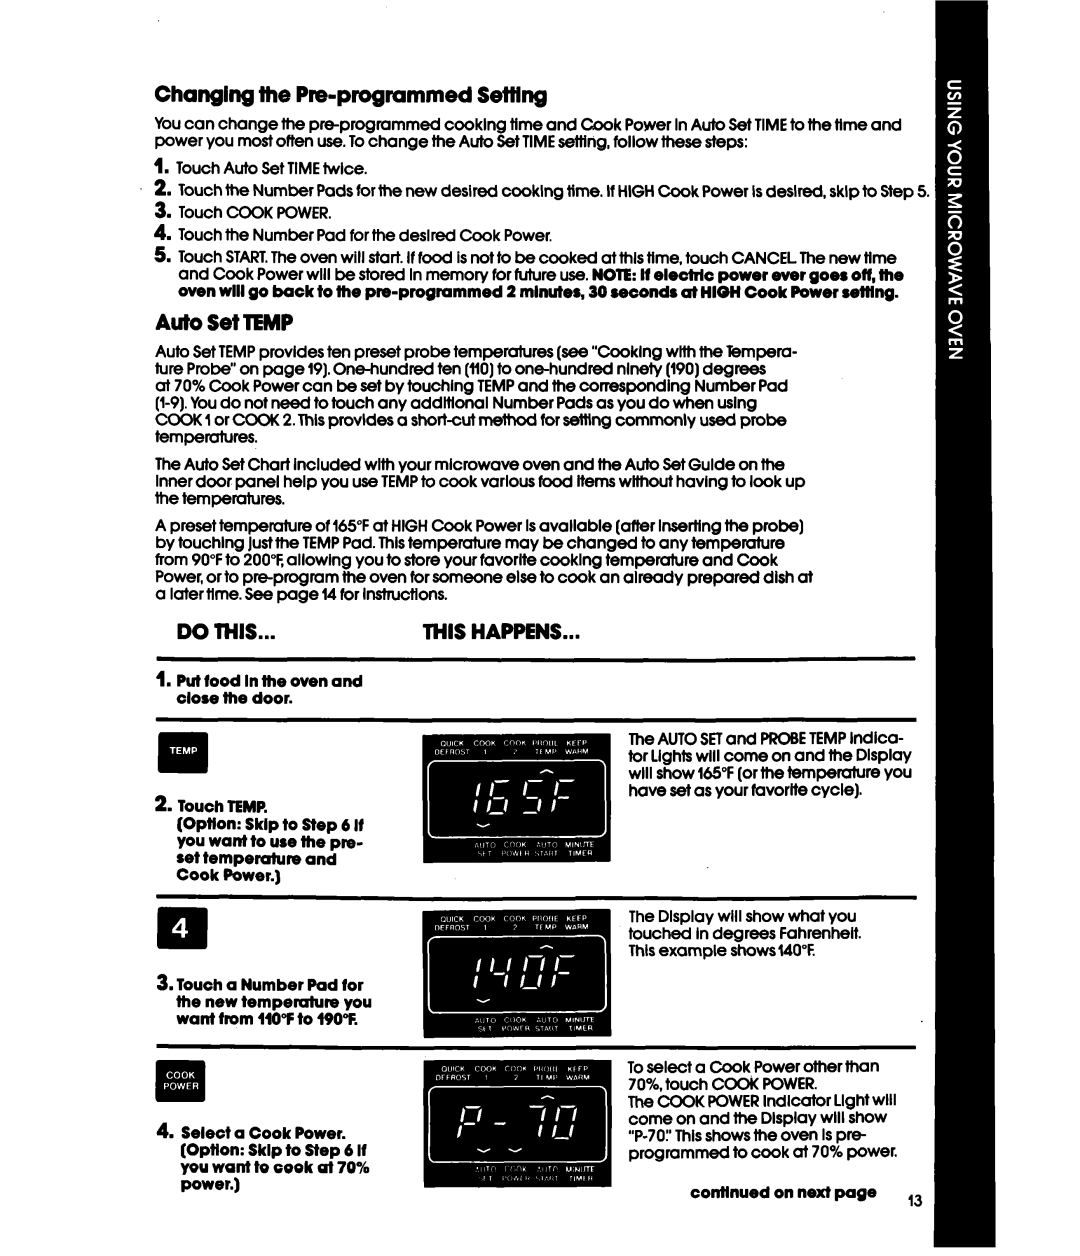 Whirlpool MH6700XW-1, MH6701XW-1 manual Changing the Pre-programmedSetting, Auto Set TEMP, Do This, This Happens 